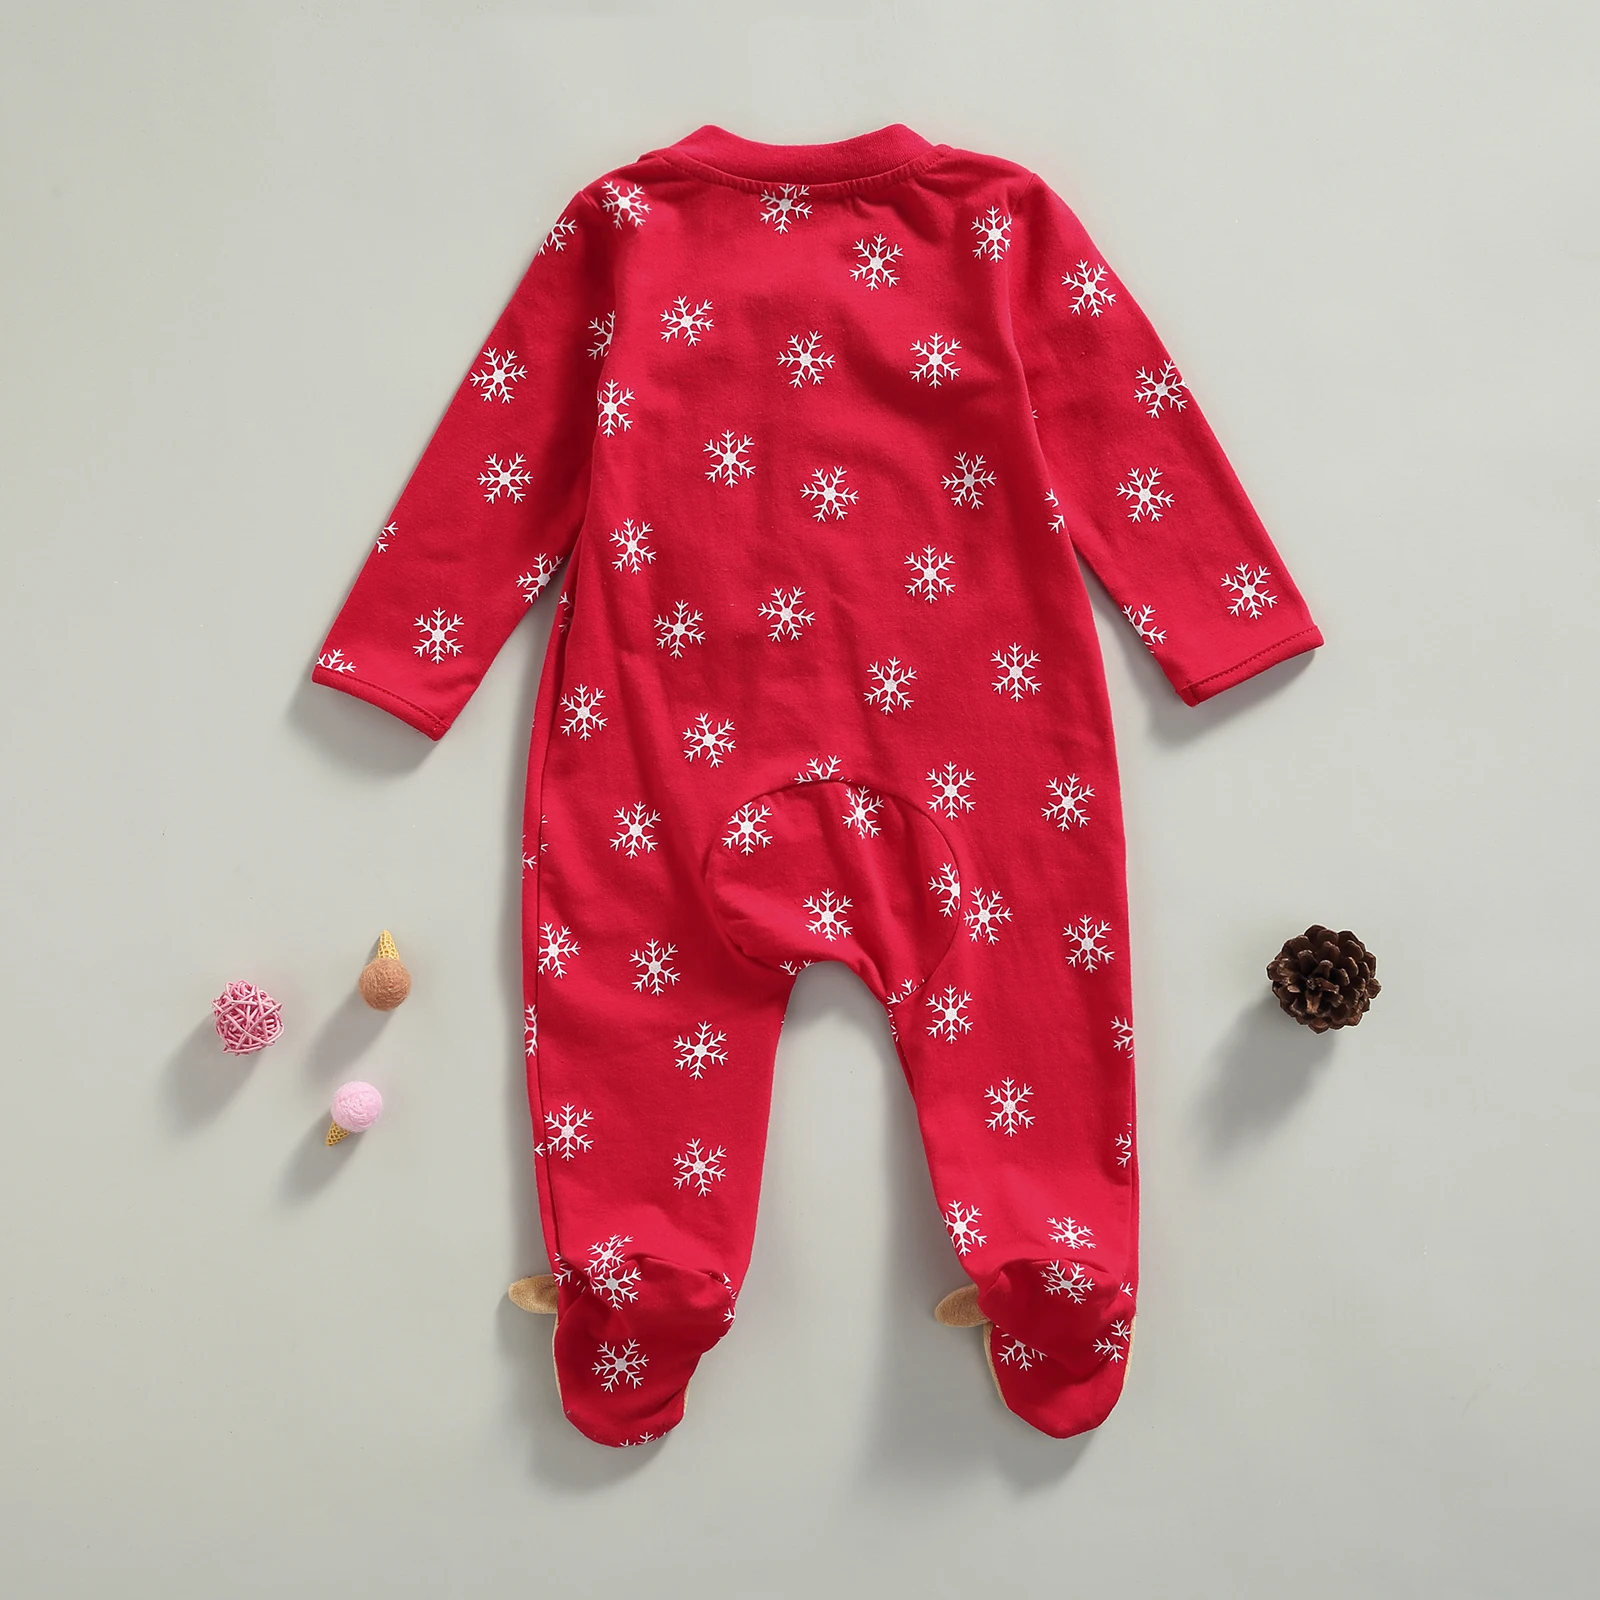 

RWYBEYW Baby Romper Christmas Snowflake Deer Embroidery V-Neck Long Sleeve Jumpsuit for Spring Fall Red 0-9 Months